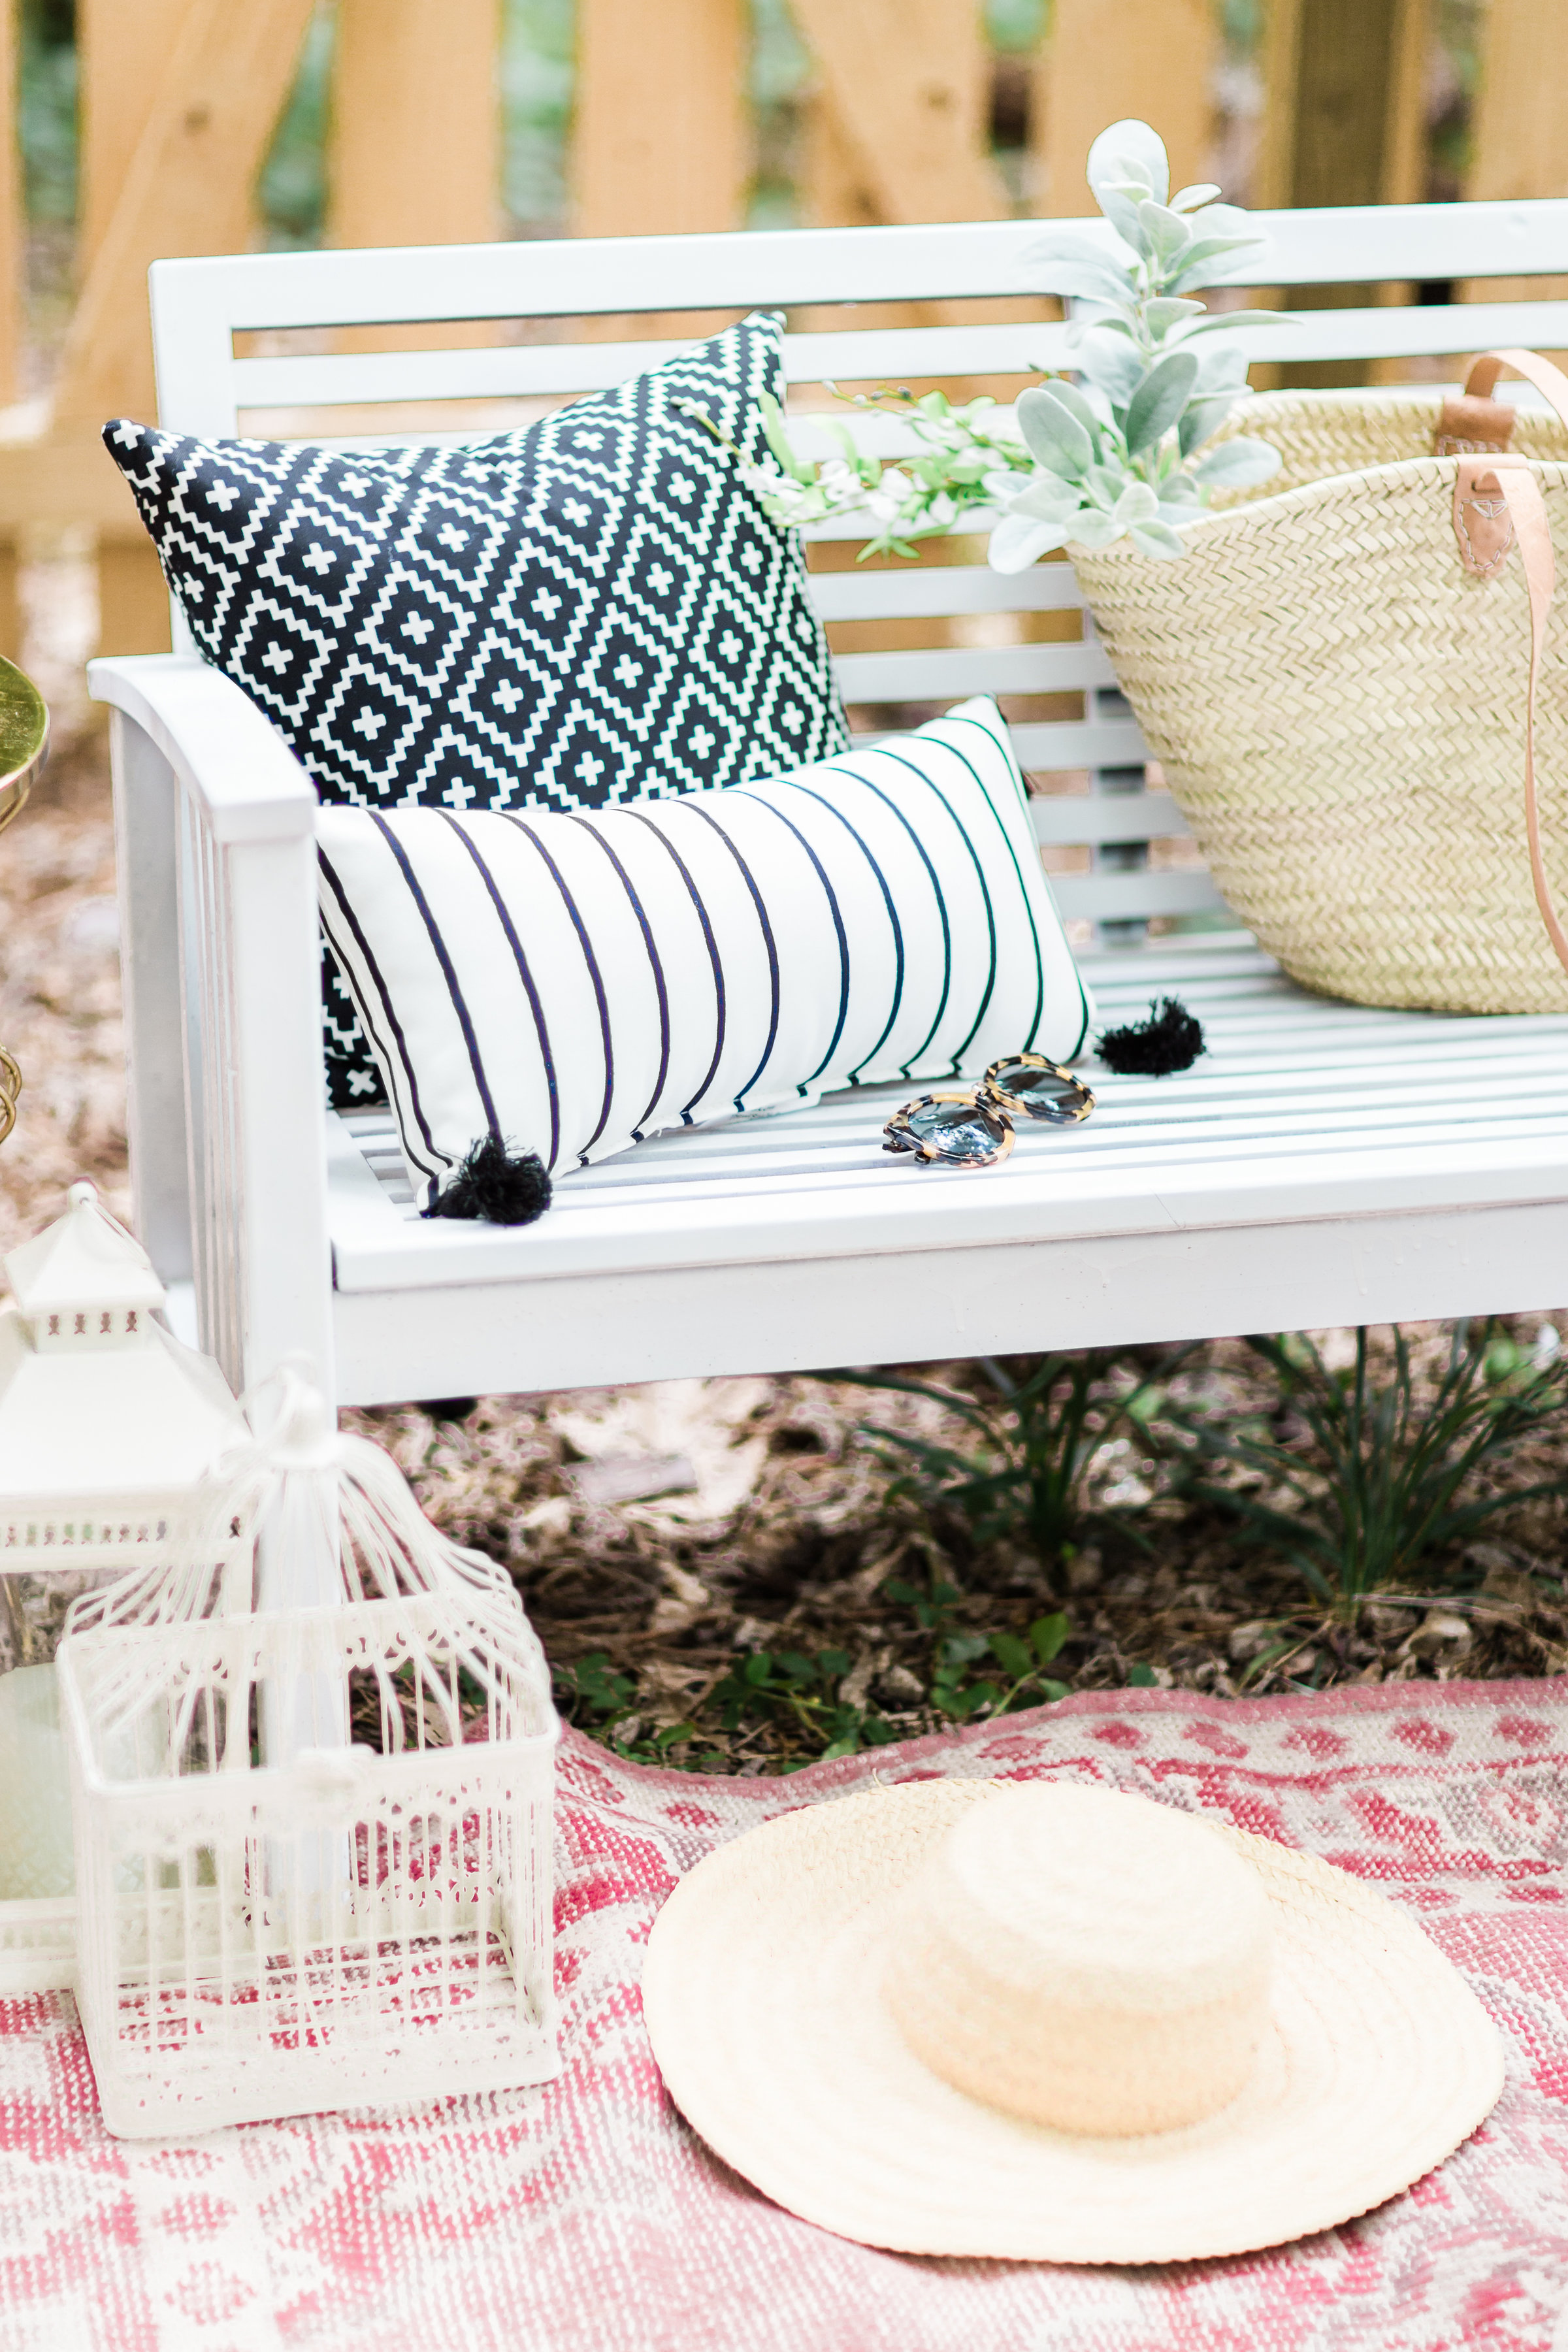 6 Tricks for Easy Backyard Entertaining; a.k.a., how to have the best summer parties. @Orkin #summerwithOrkin #ad | glitterinc.com | @glitterinc